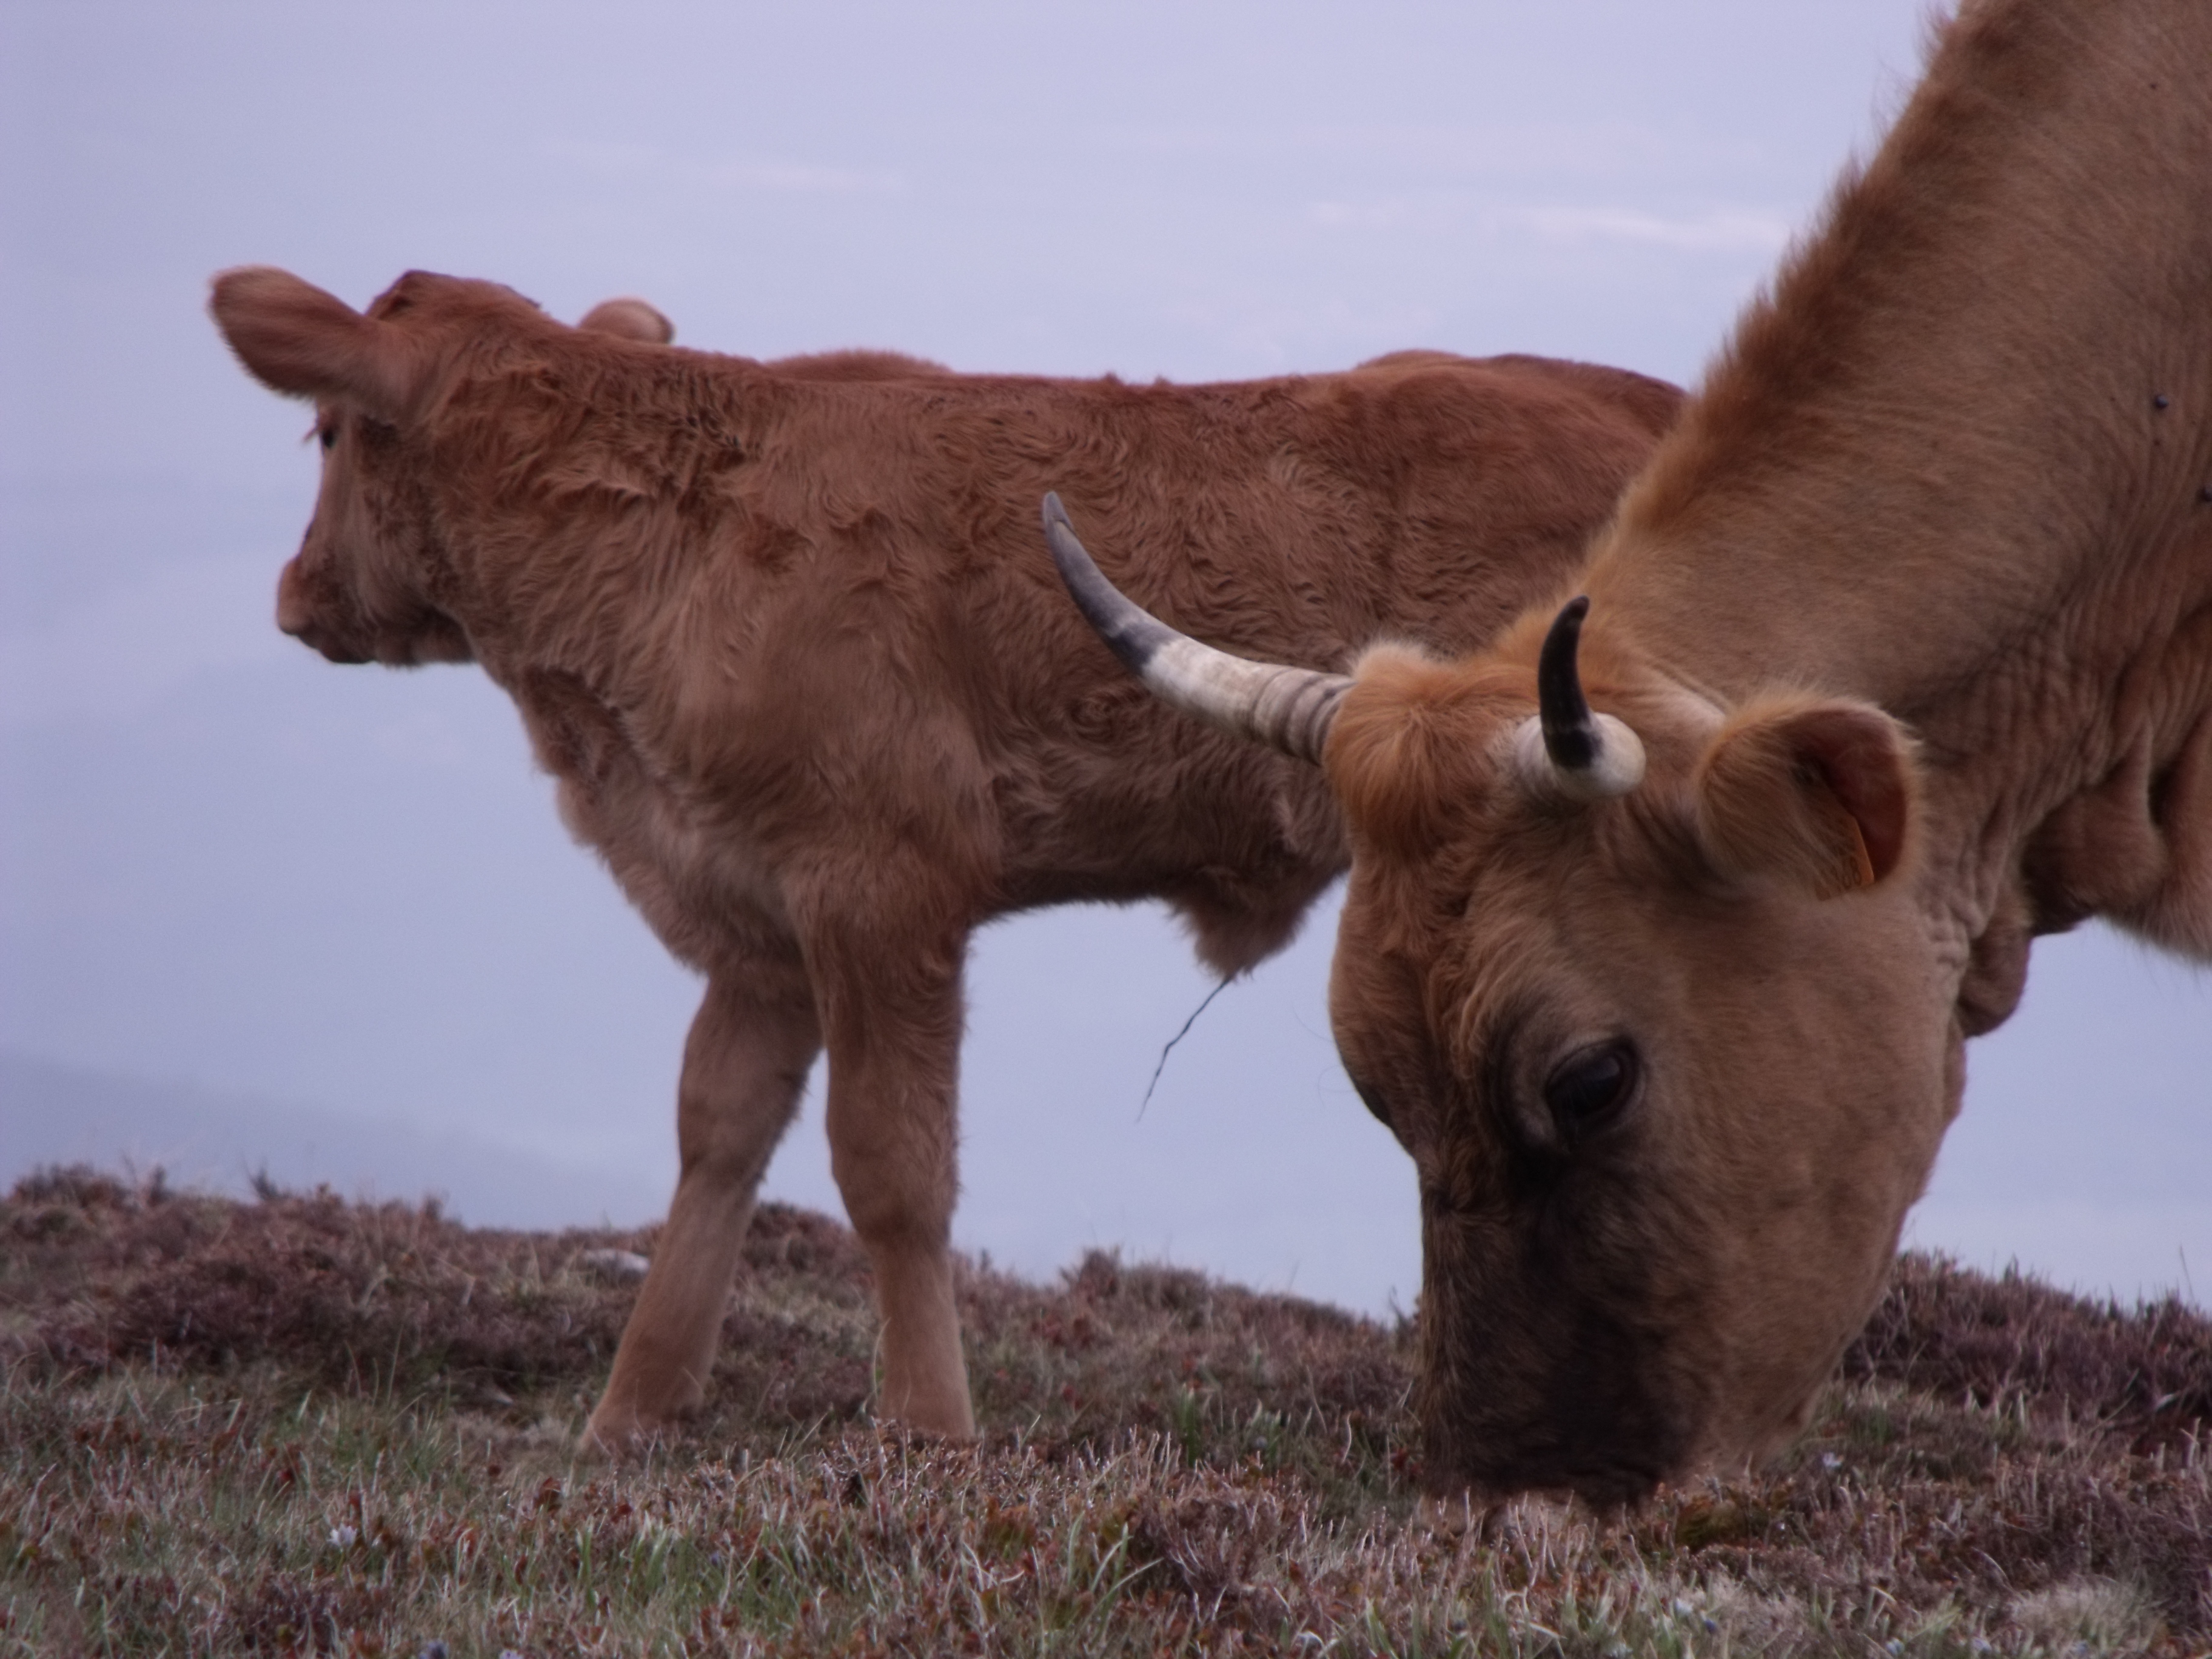 Calf and cow in Gorbia mountain